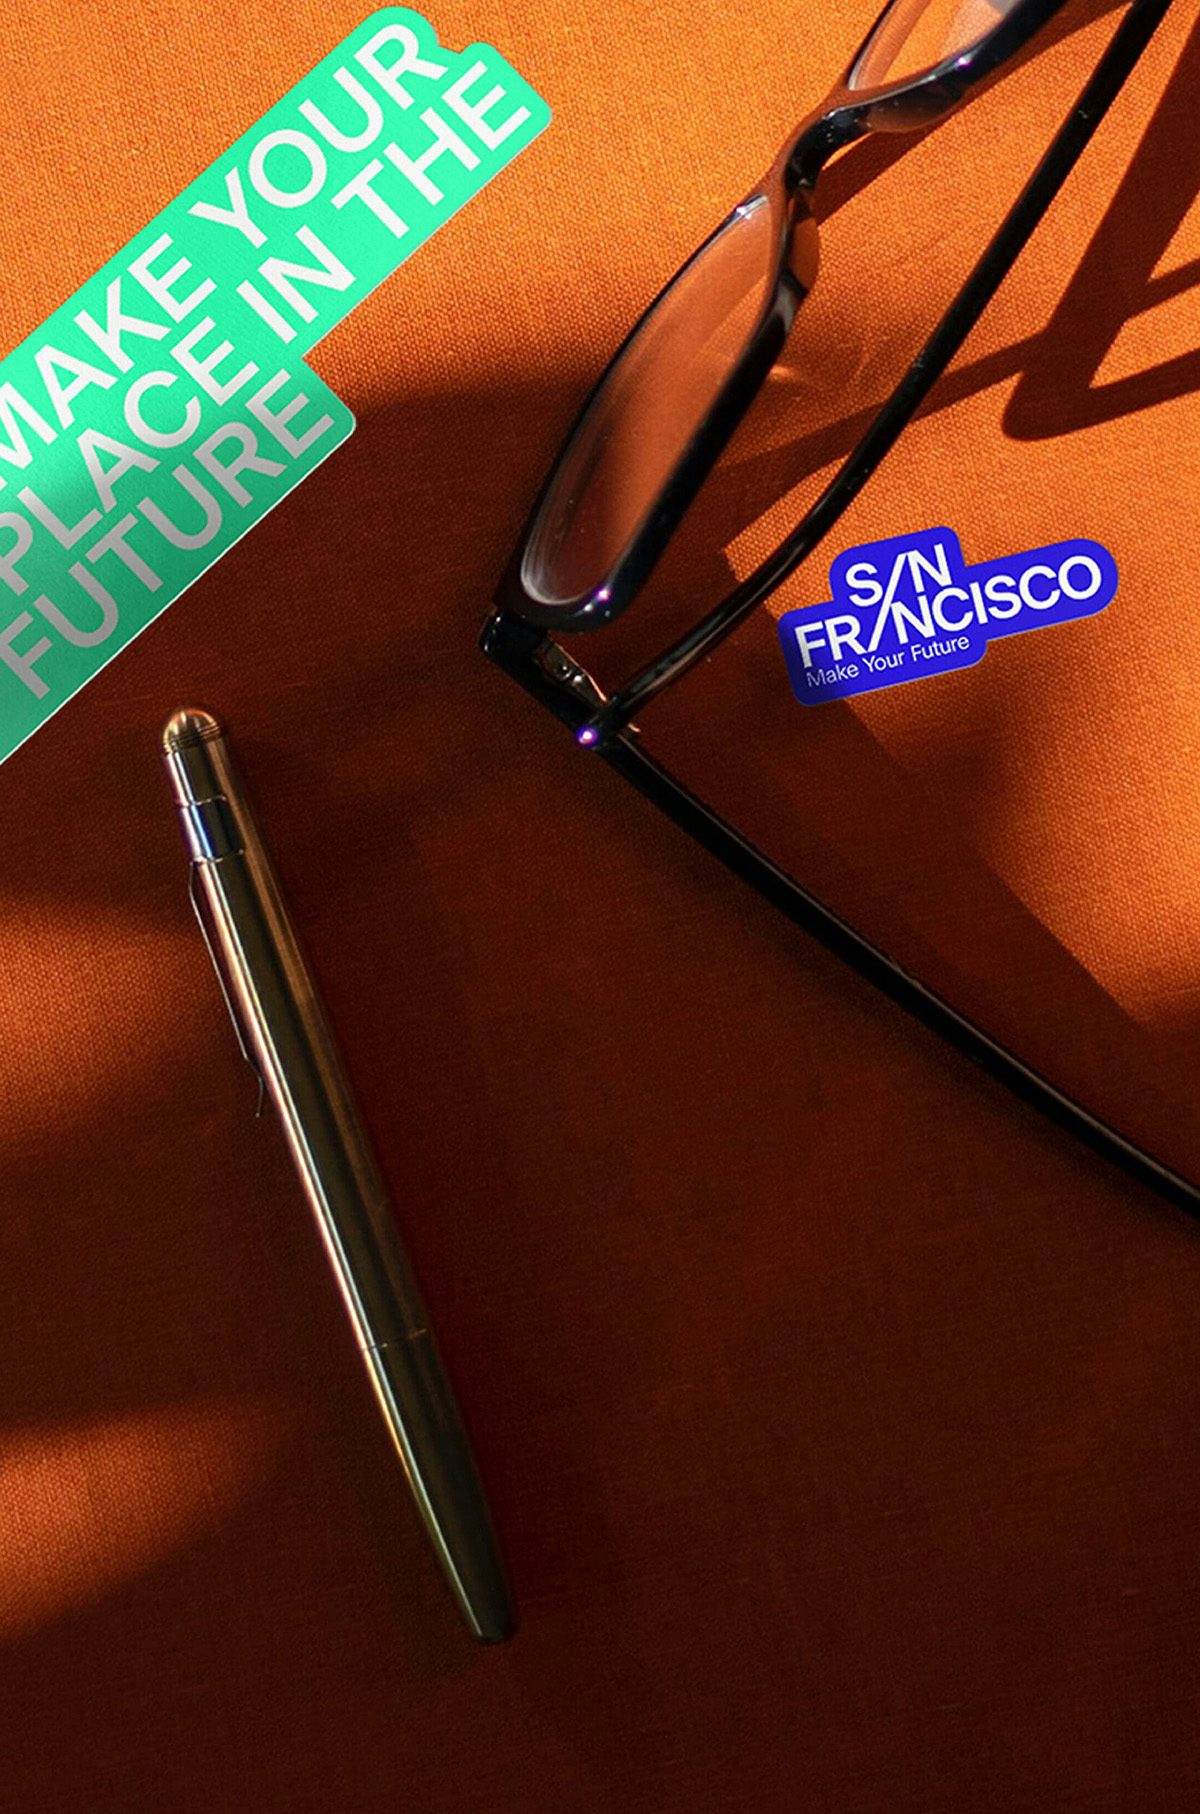 Photograph showing the San Francisco place branding on an orange table with stickers that read 'Make your place in the future' and 'San Francisco' next to a pair of glasses and a pen